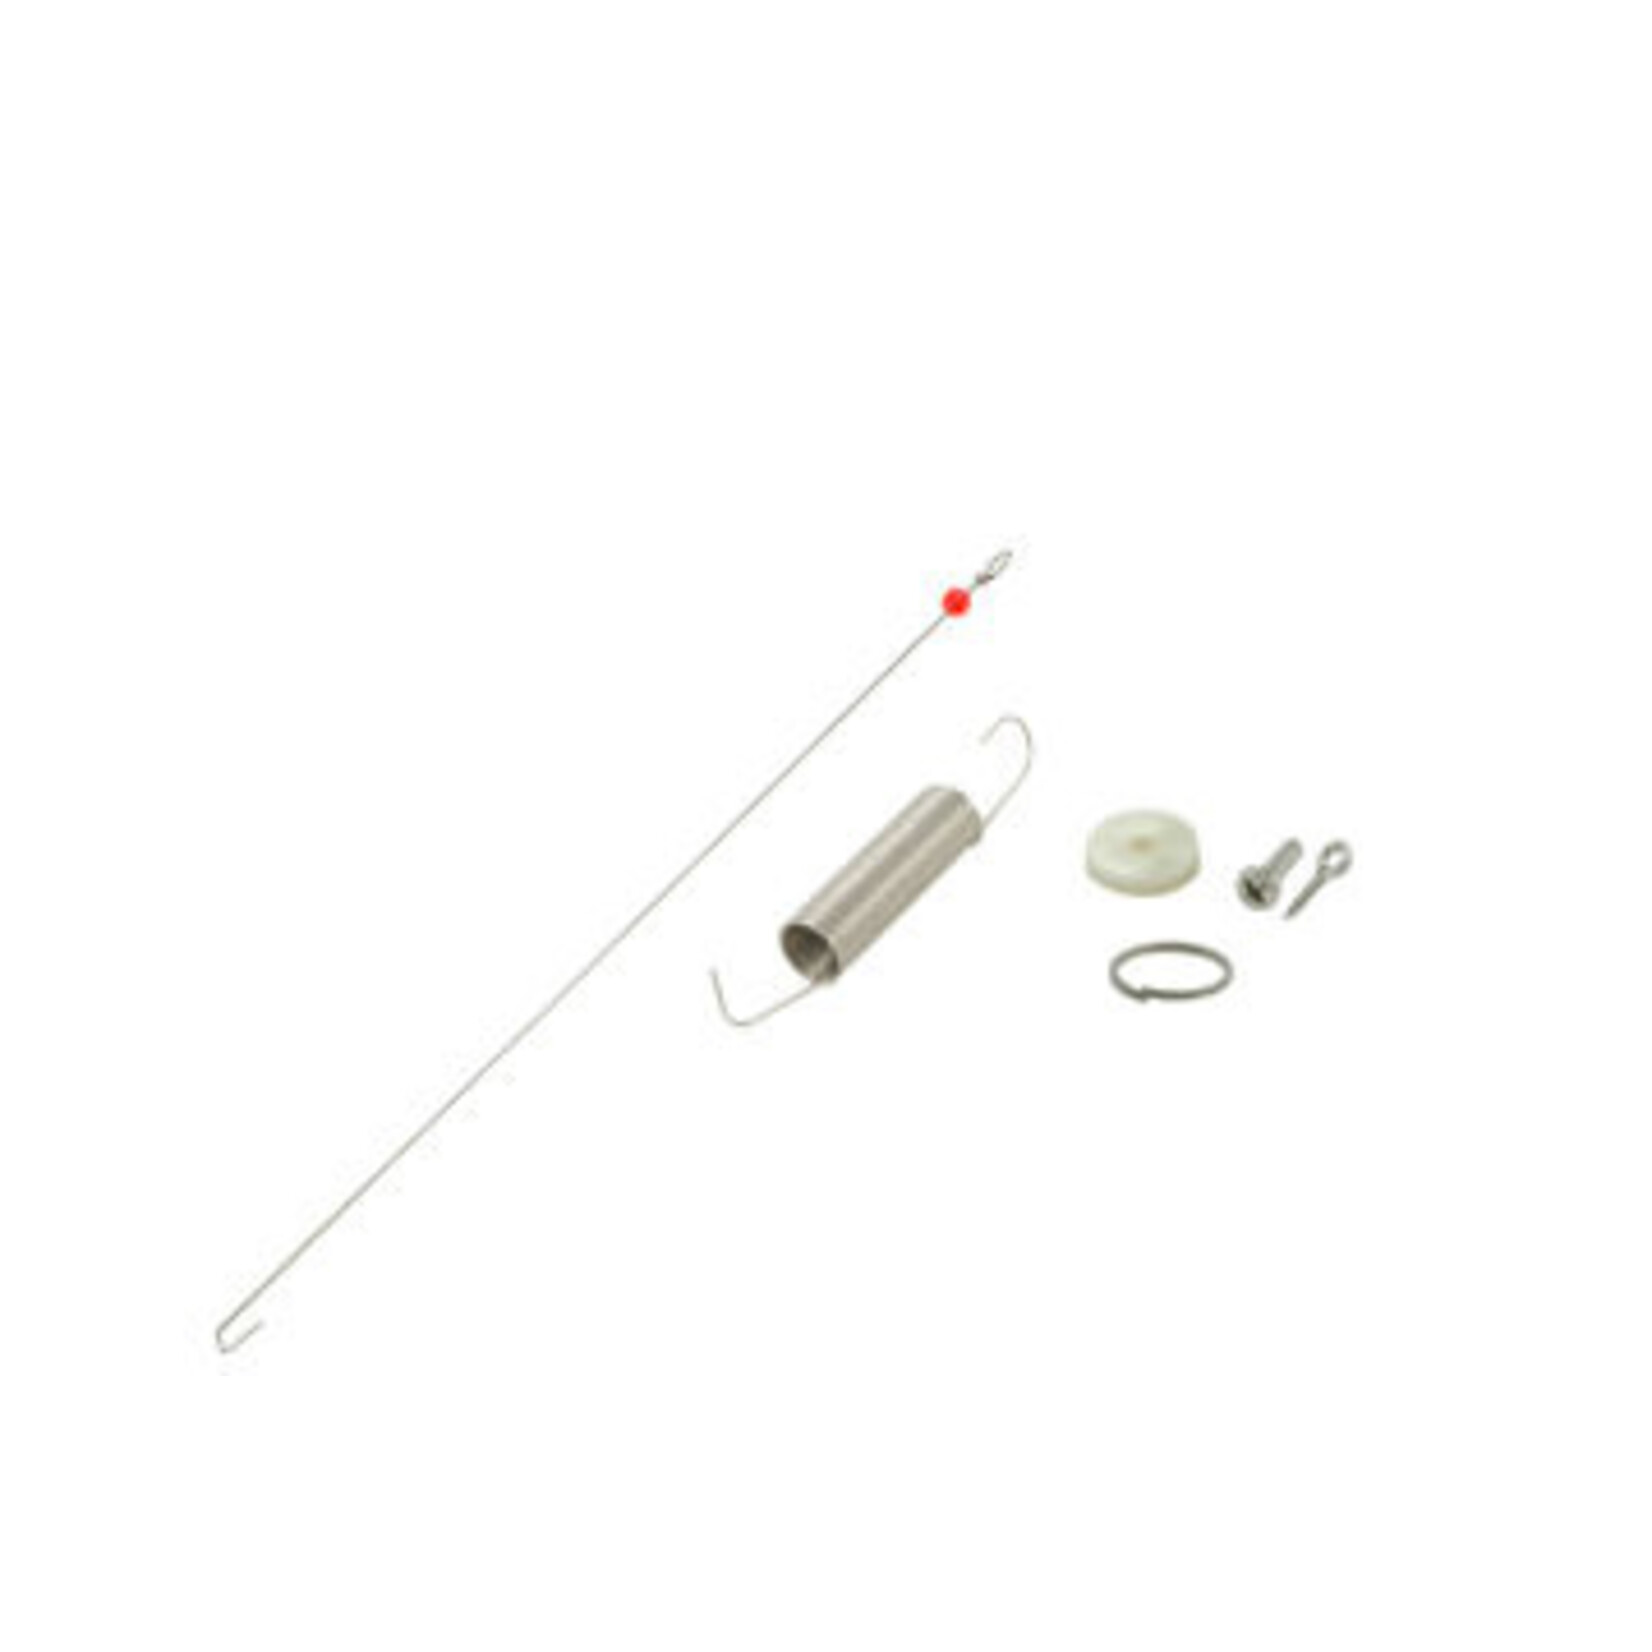 OFF SHORE TACKLE Offshore TATTLE FLAG ECONOMY UPGRADE KIT FOR OR12L/OR12R-No OR16 or FLAG INCLUDED